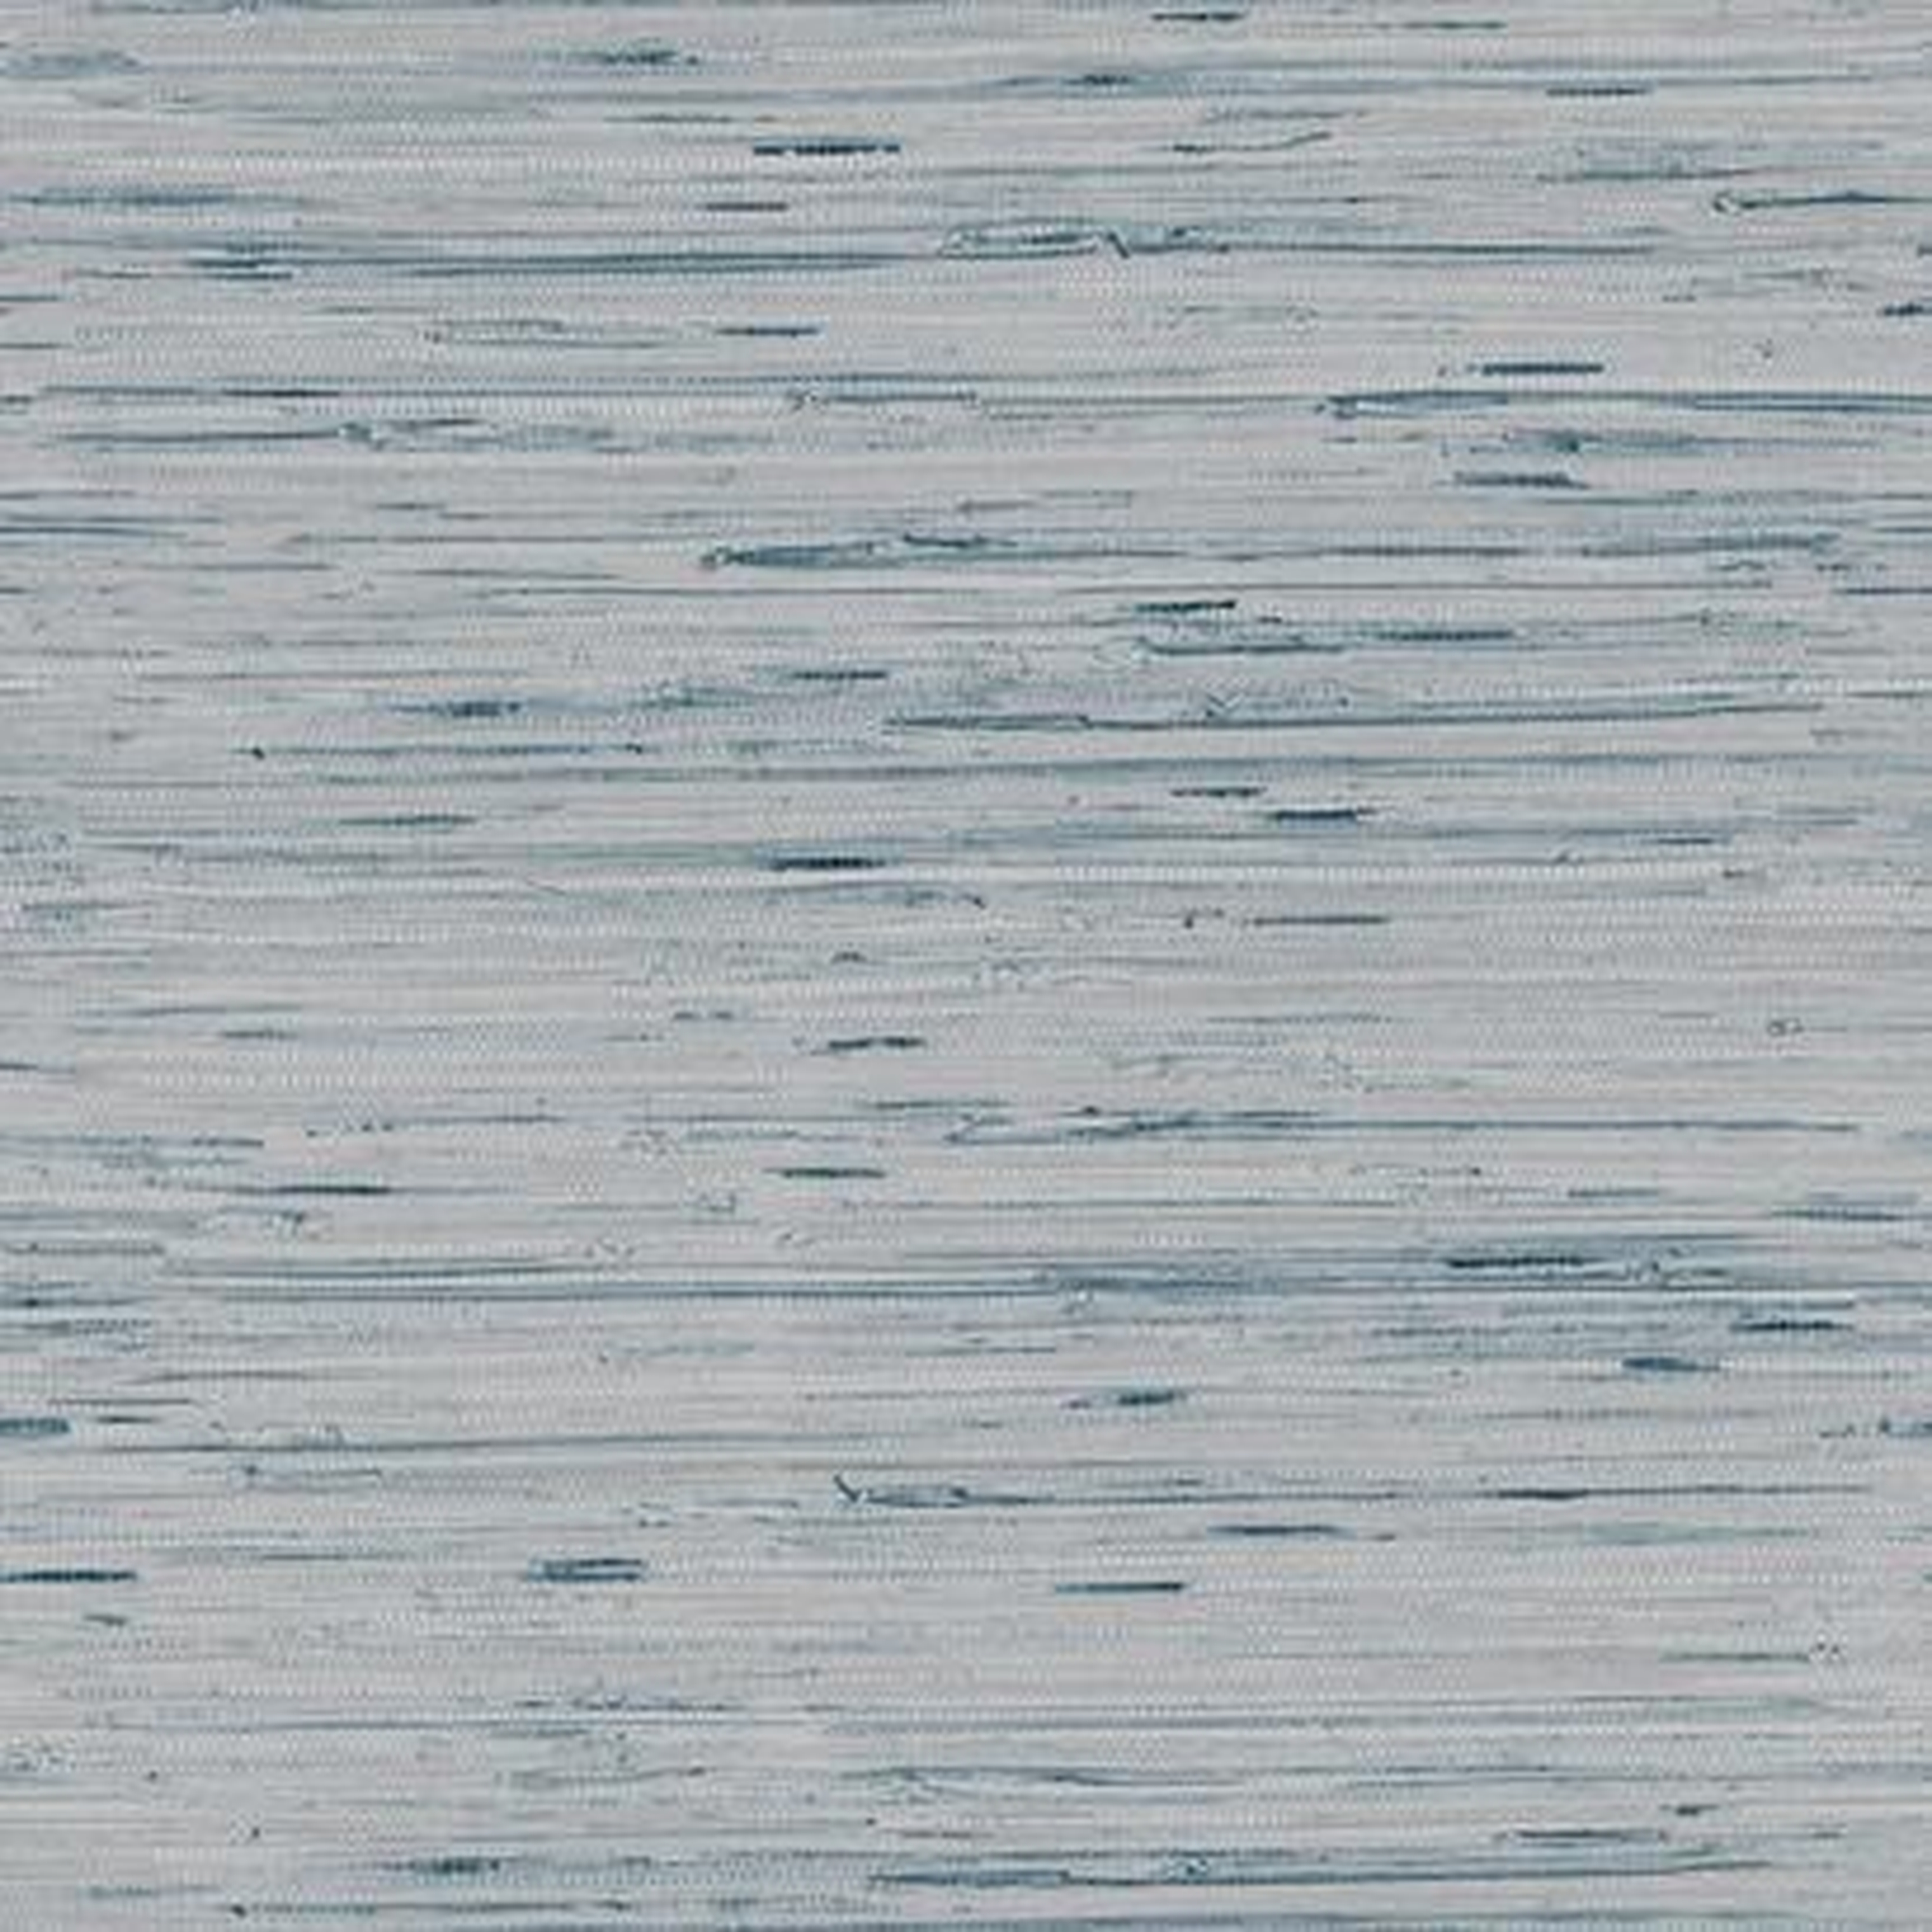 Lustrous Grasscloth, A75-Dazzling Dimensions, Y6201603 - York Wallcoverings